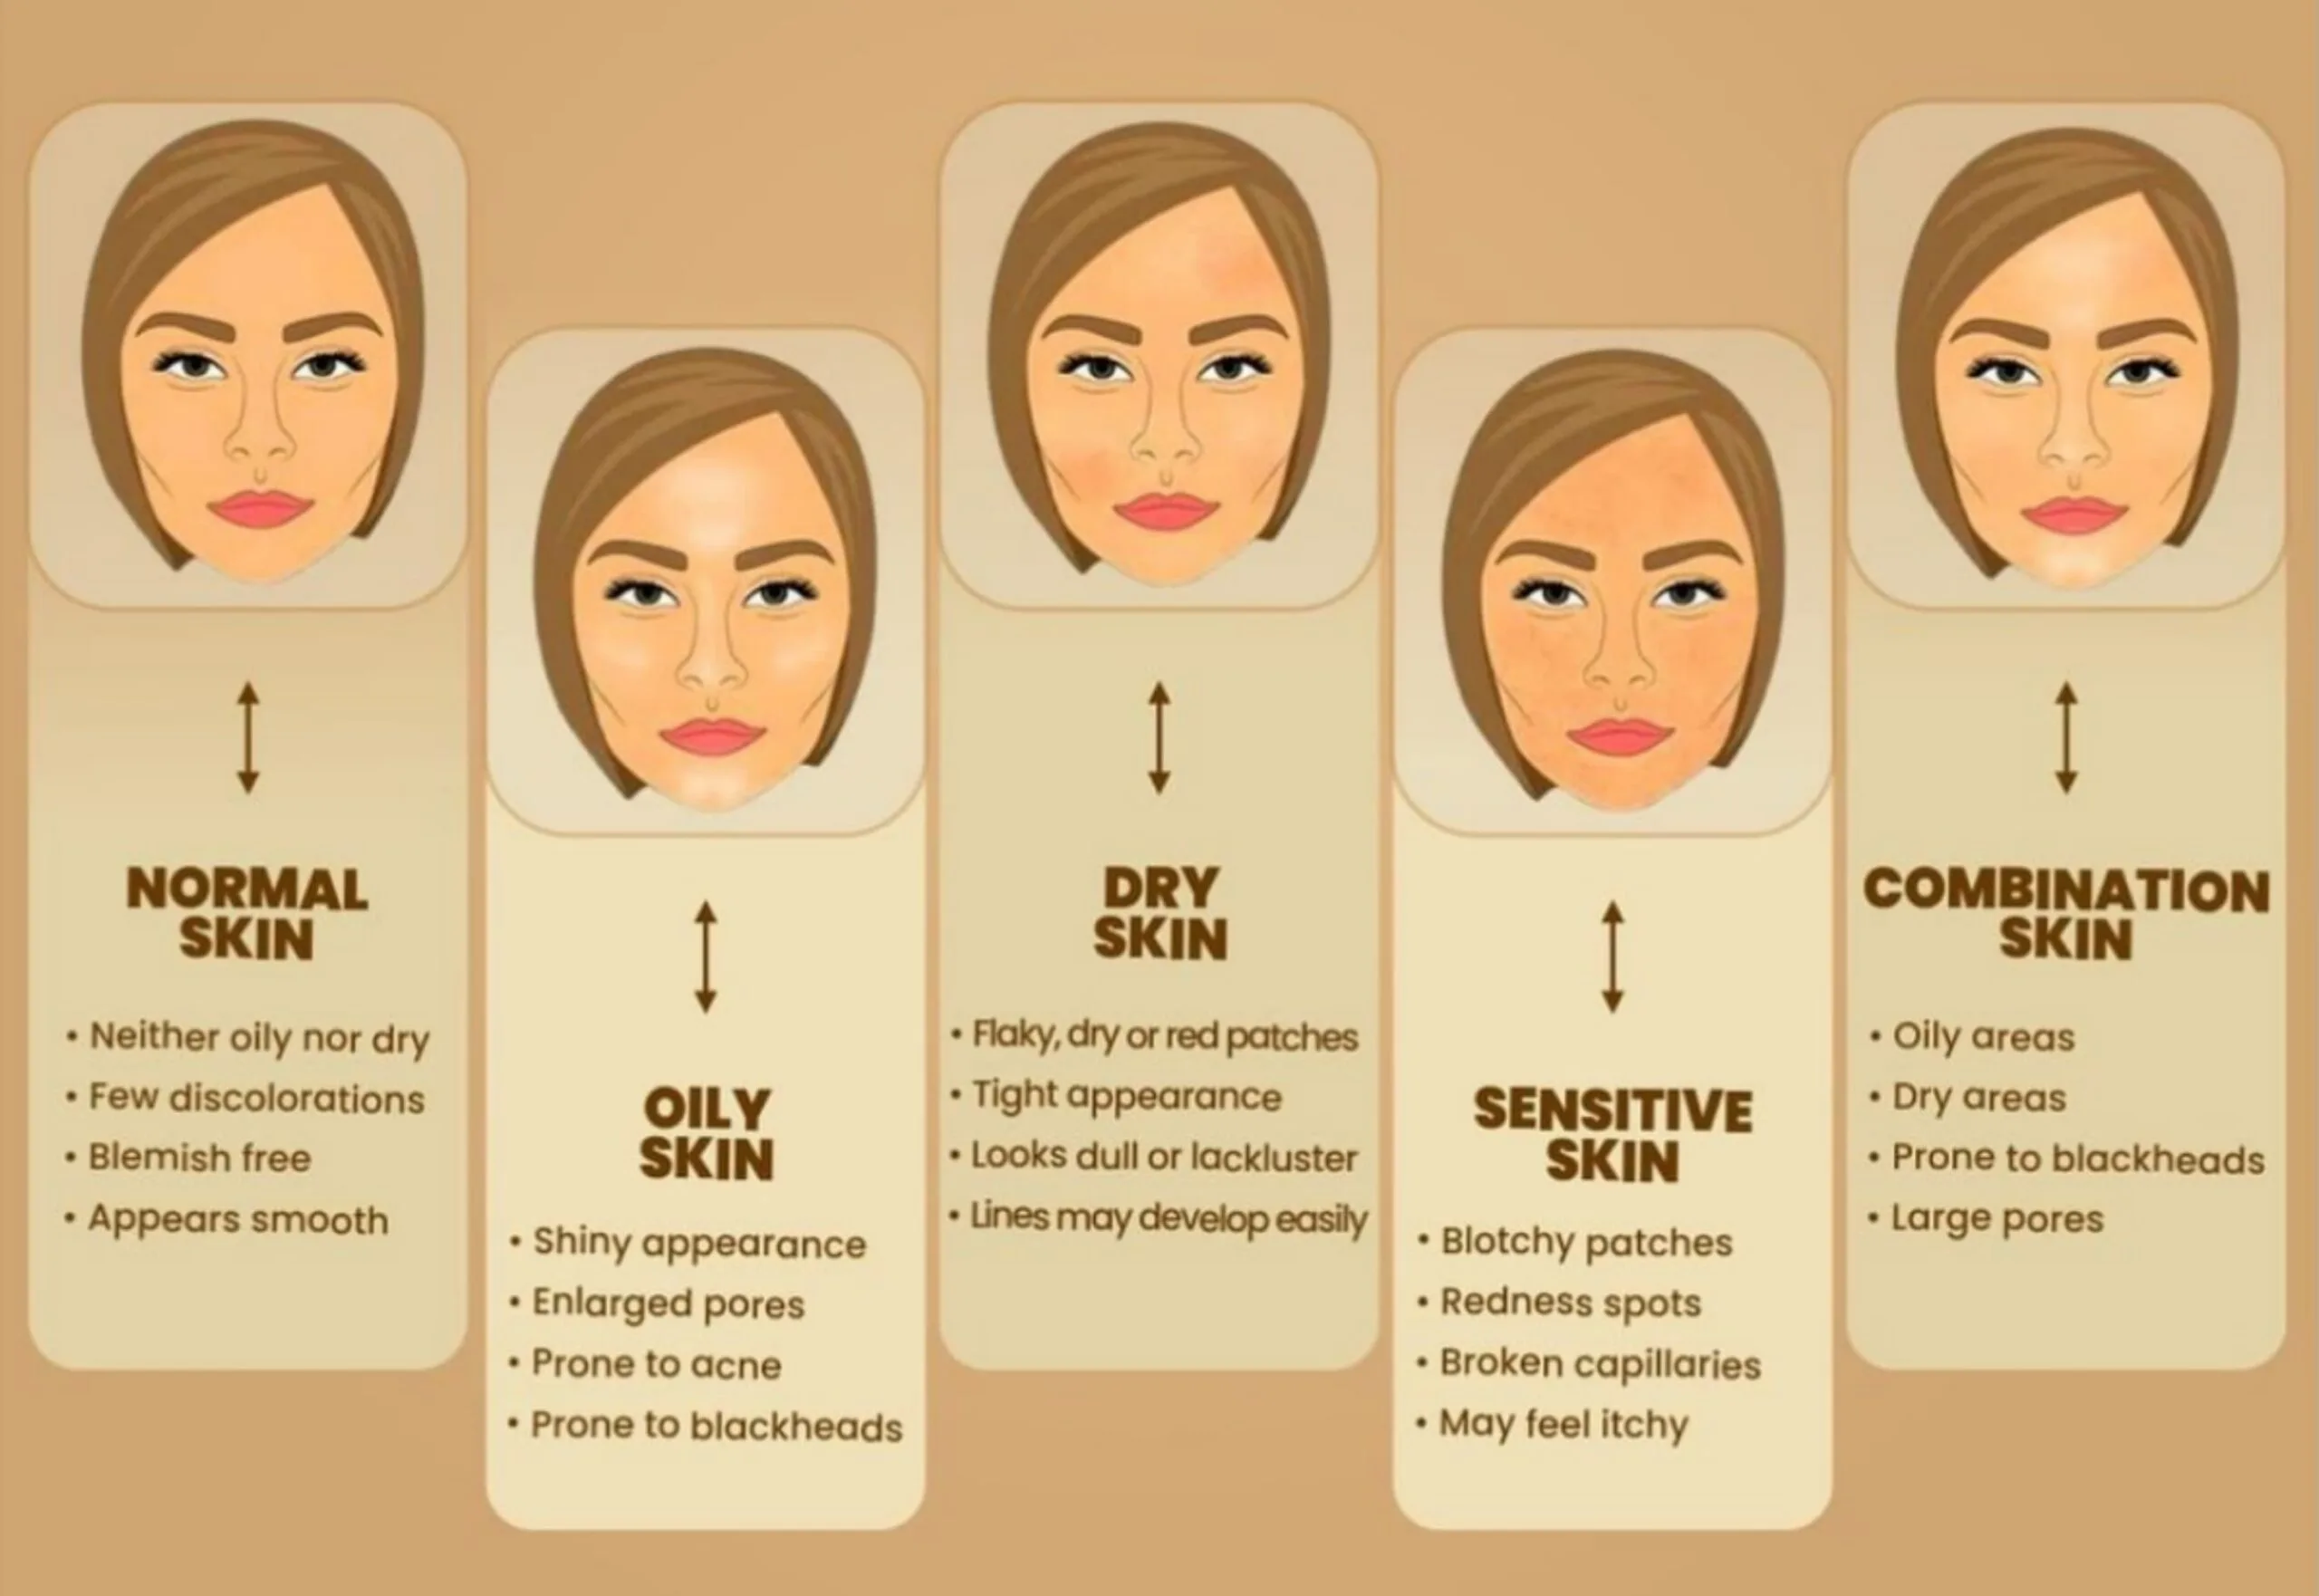 5 Different Types of Skin and How to Take Care of Each